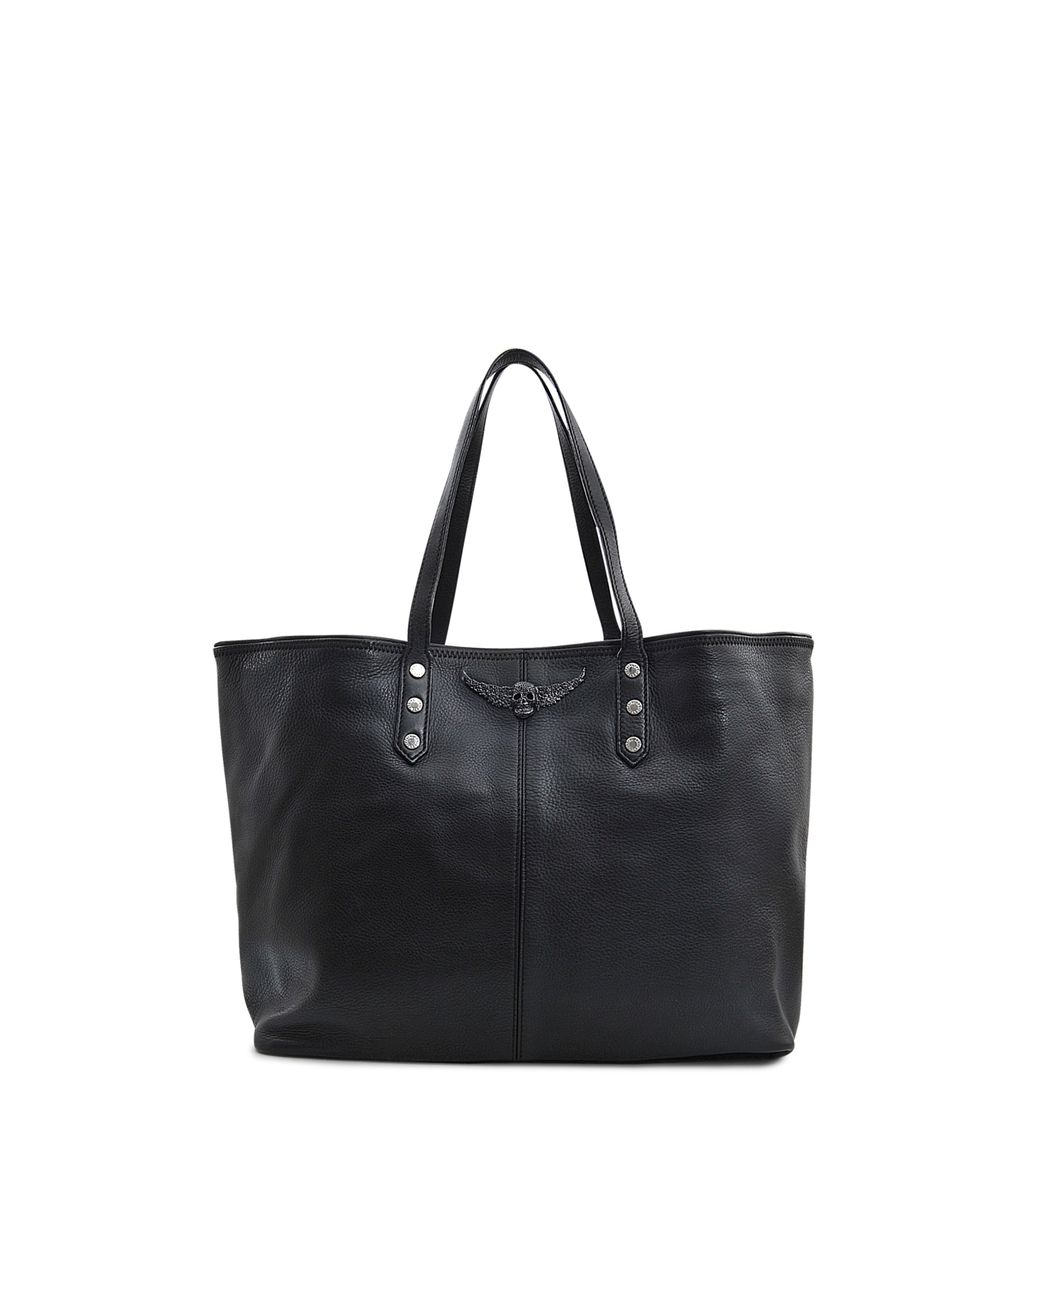 Zadig & Voltaire Mick Leather Tote in Black | Lyst